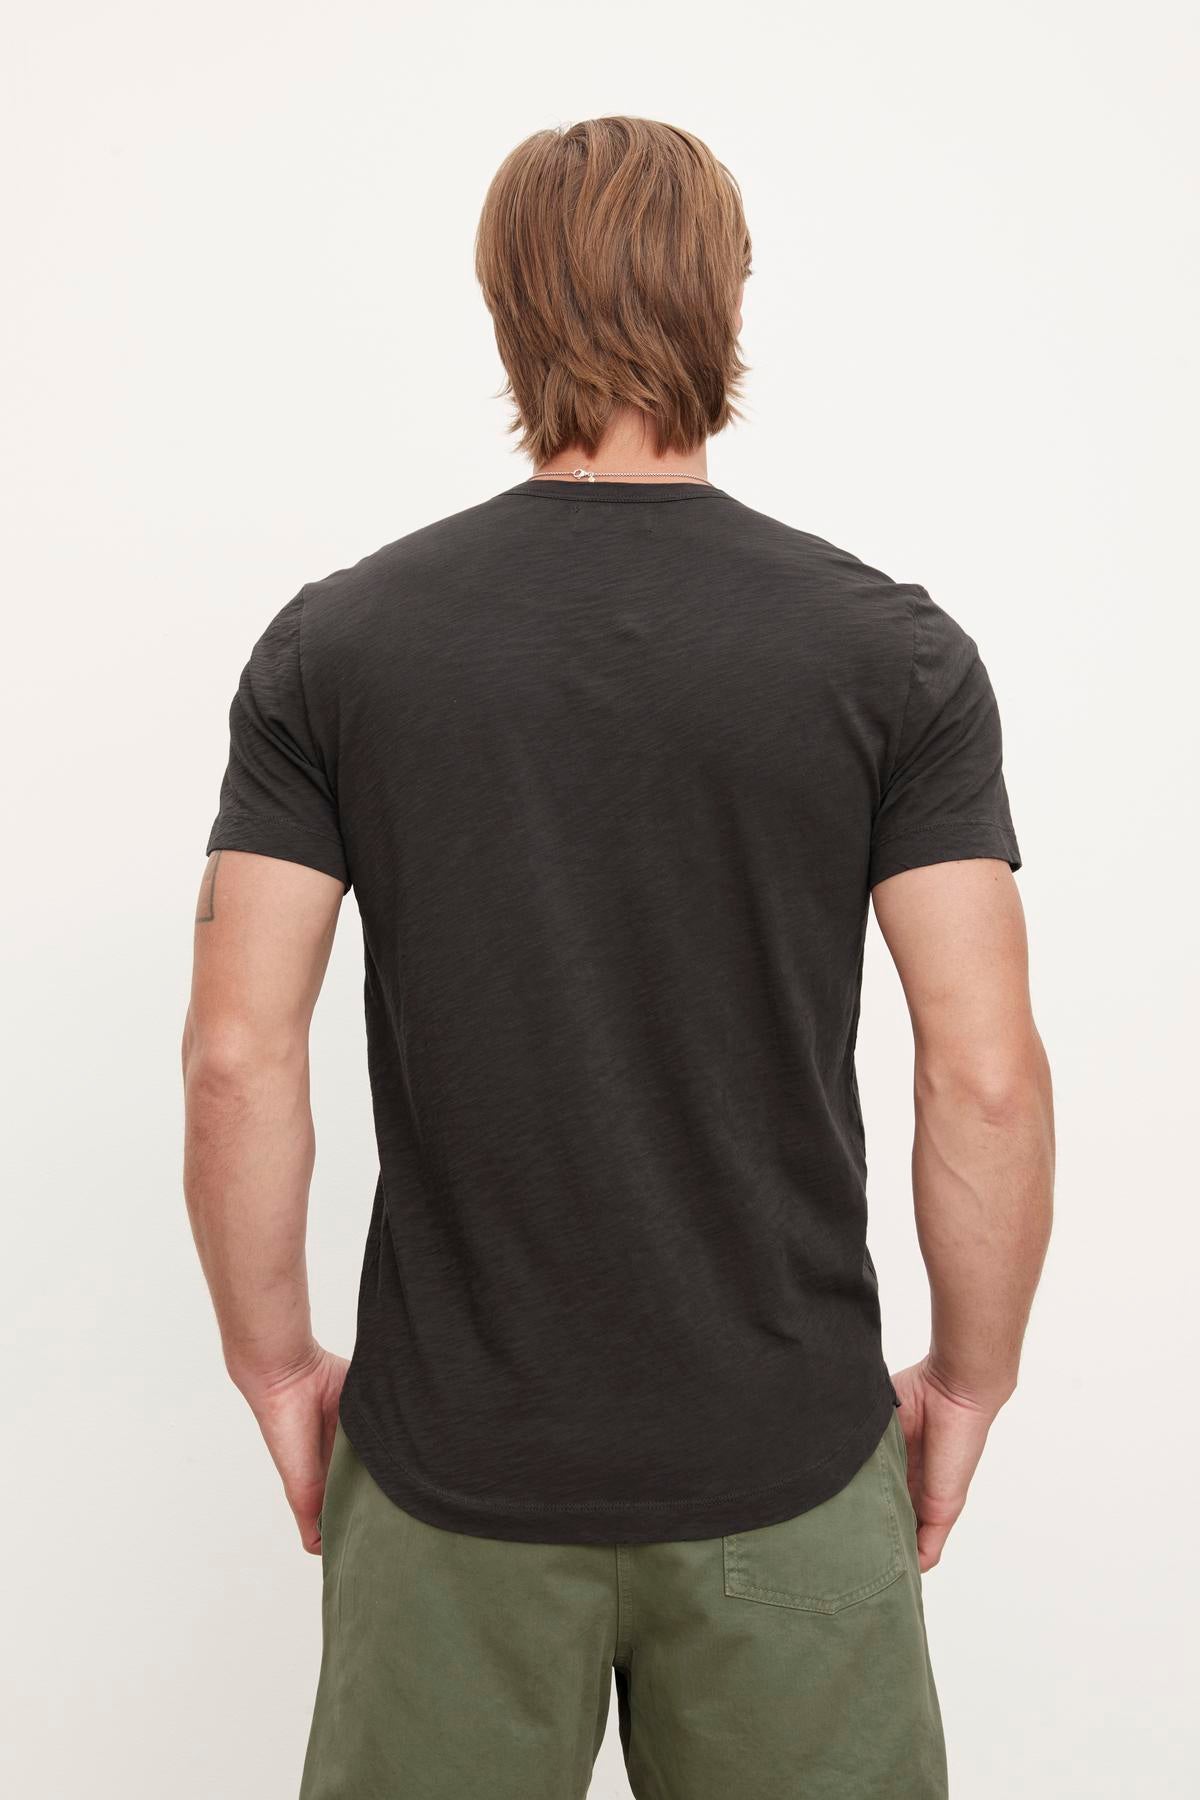   Rear view of a man with brown hair wearing a Velvet by Graham & Spencer AMARO TEE crew neck t-shirt and olive green pants, standing against a plain background. 